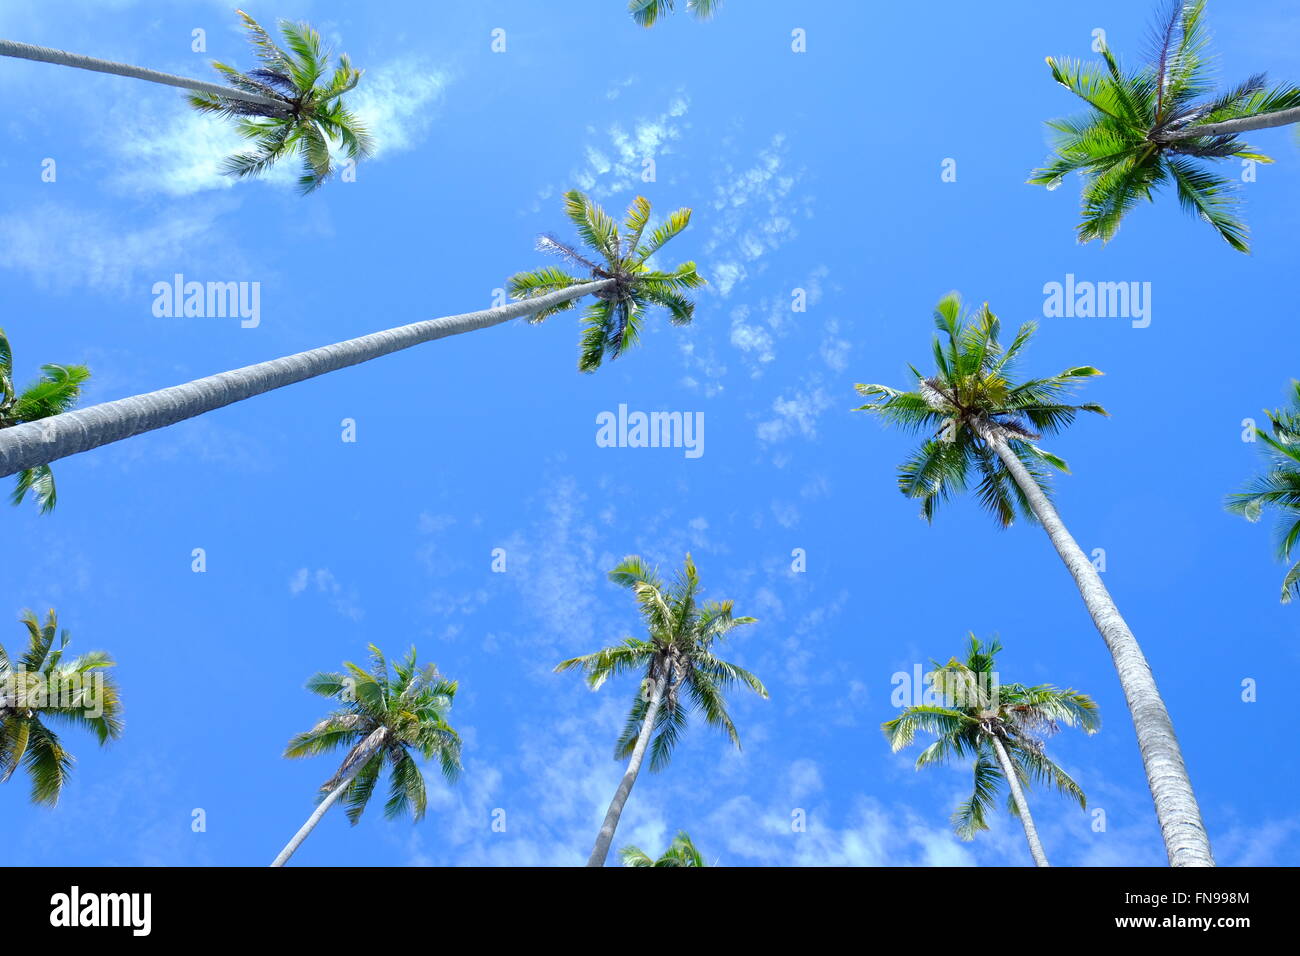 Low angle view of palm trees, Semporna, Sabah, Malaysia Stock Photo